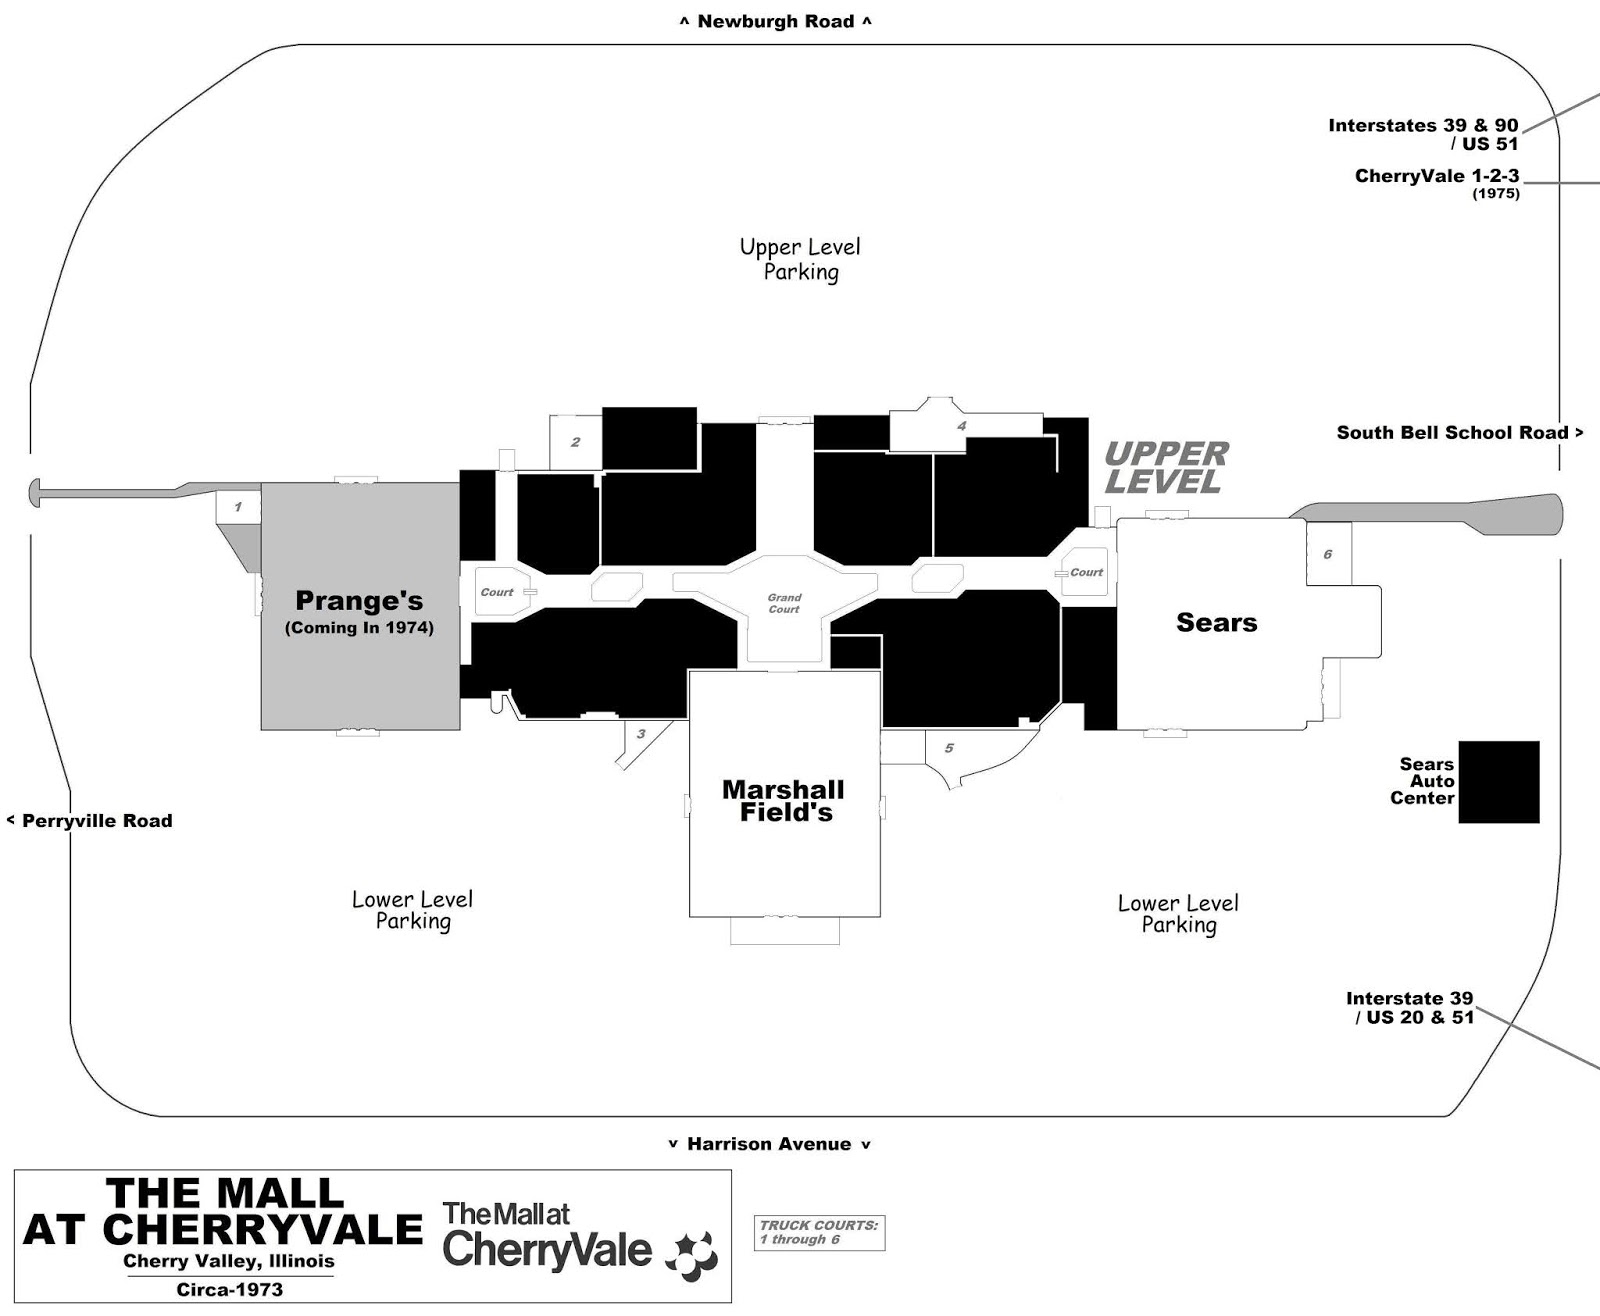 Mall Directory  CherryVale Mall